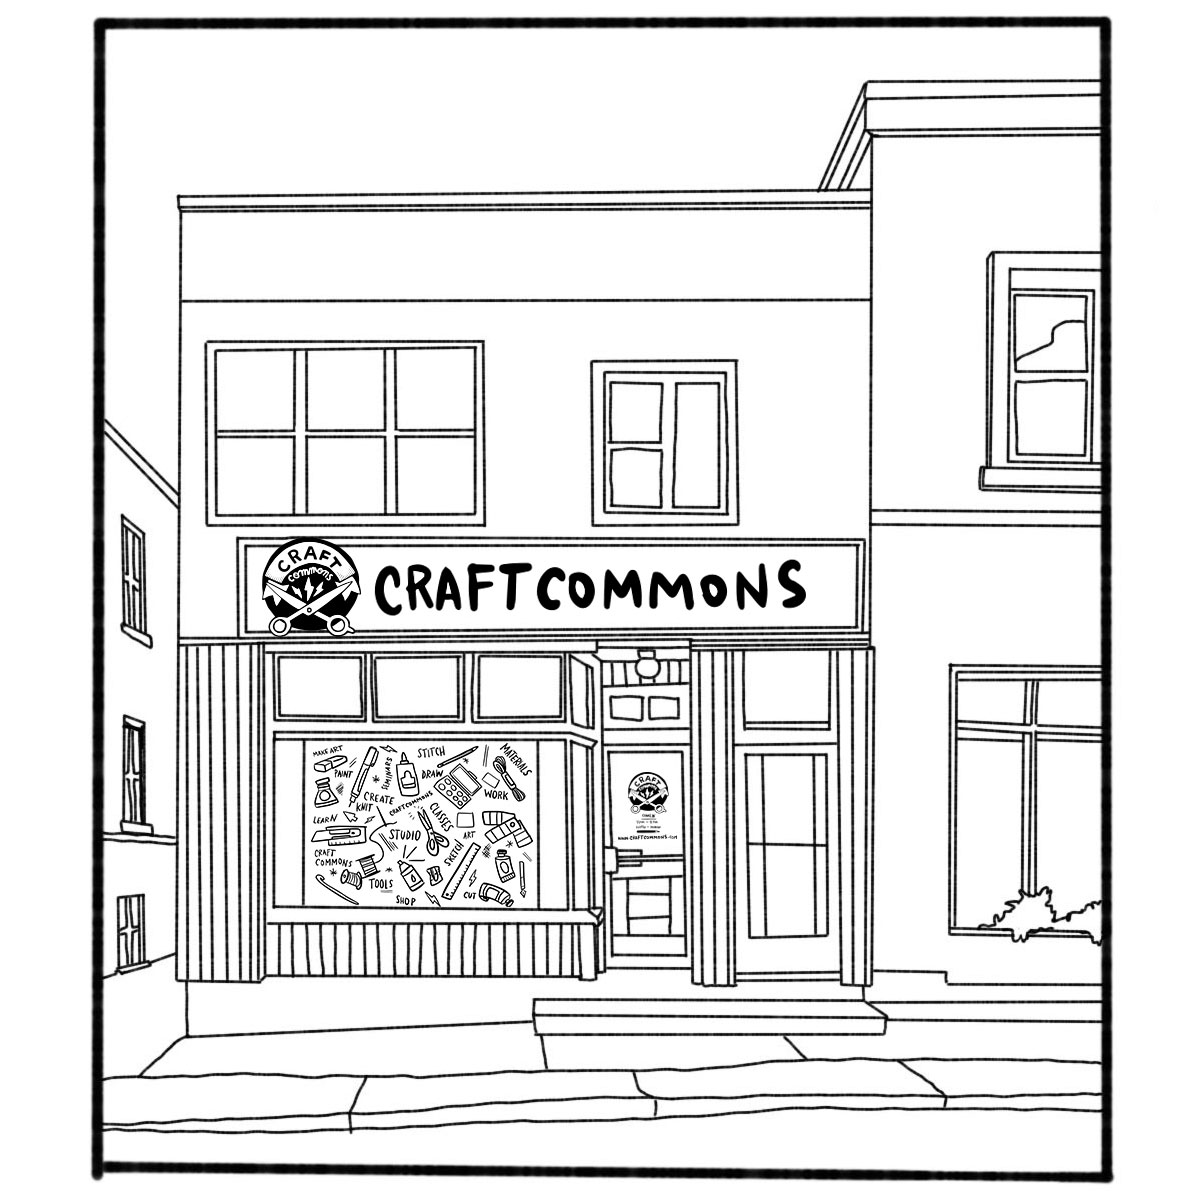 Illustrated mockup of the Craft Commons storefront